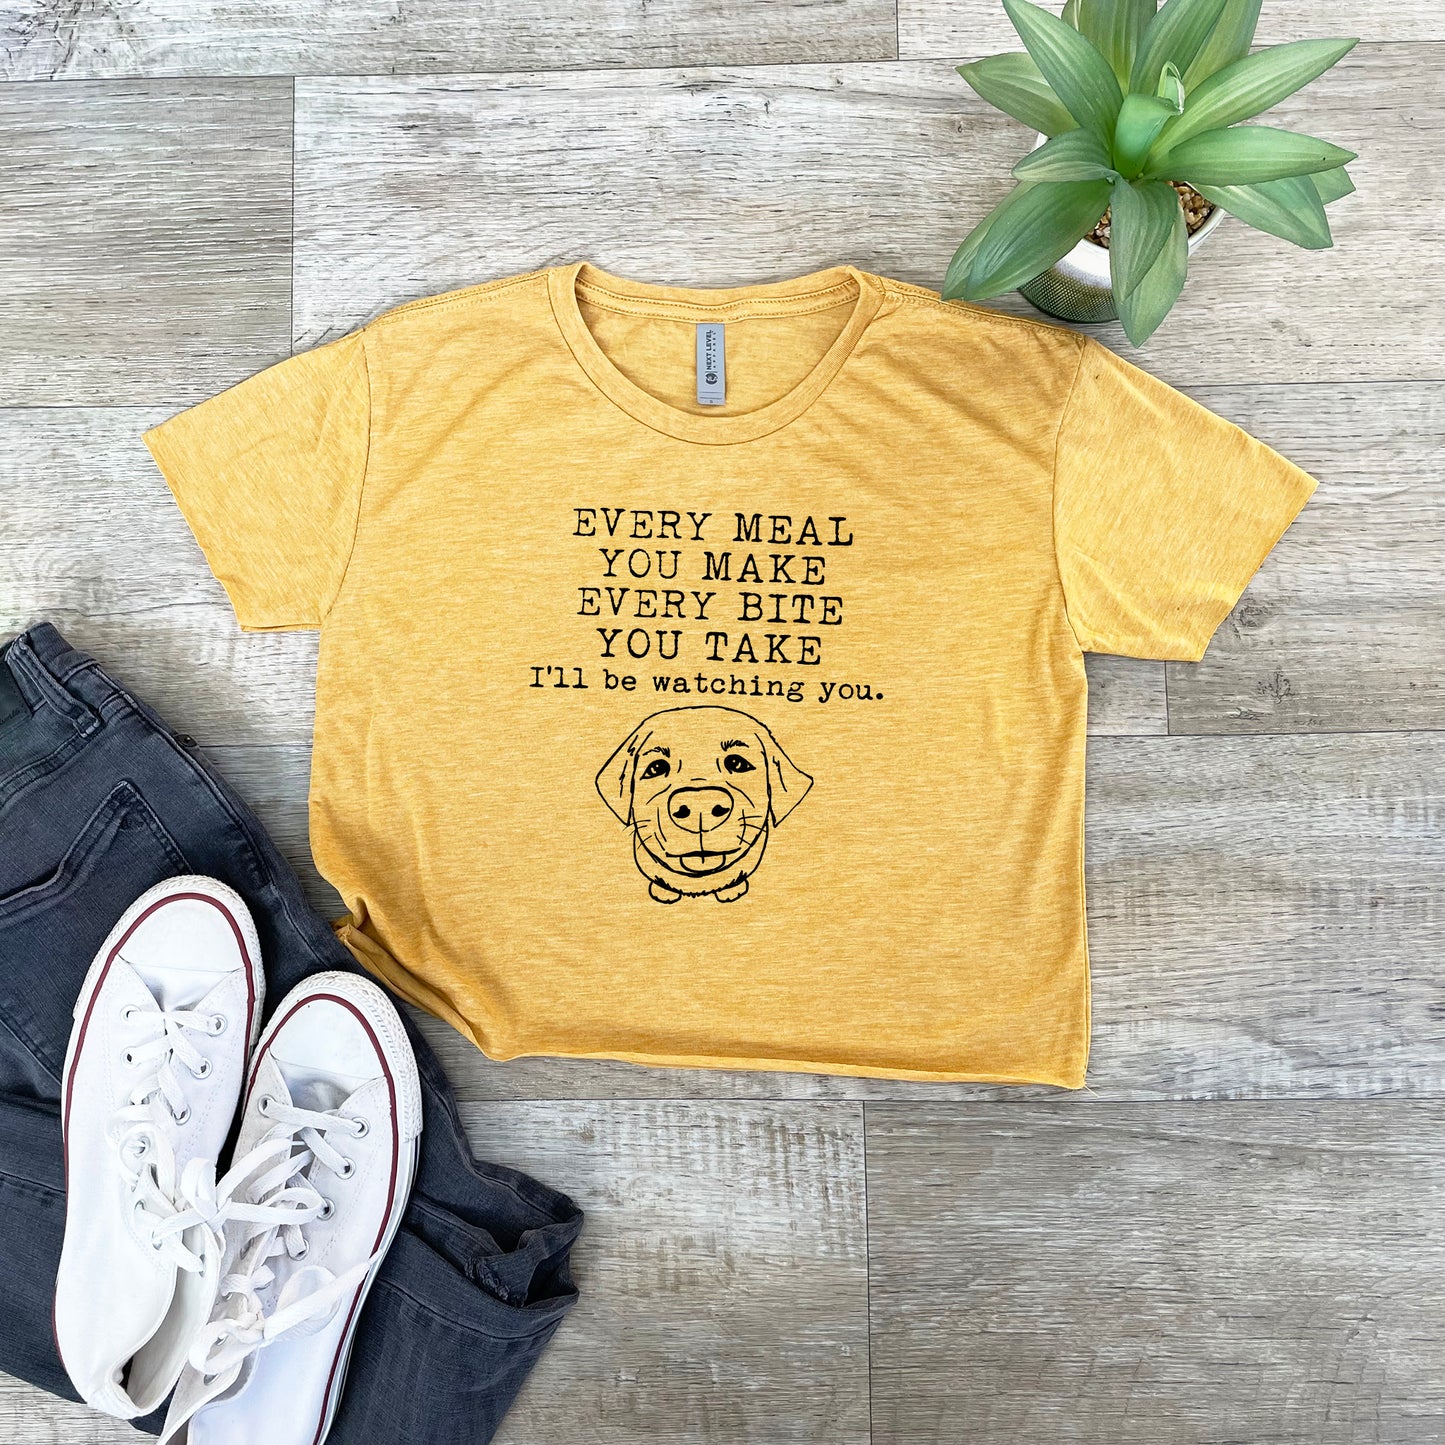 Every Meal You Make, Every Bite You Take, I'll Be Watching You - Women's Crop Tee - Heather Gray or Gold